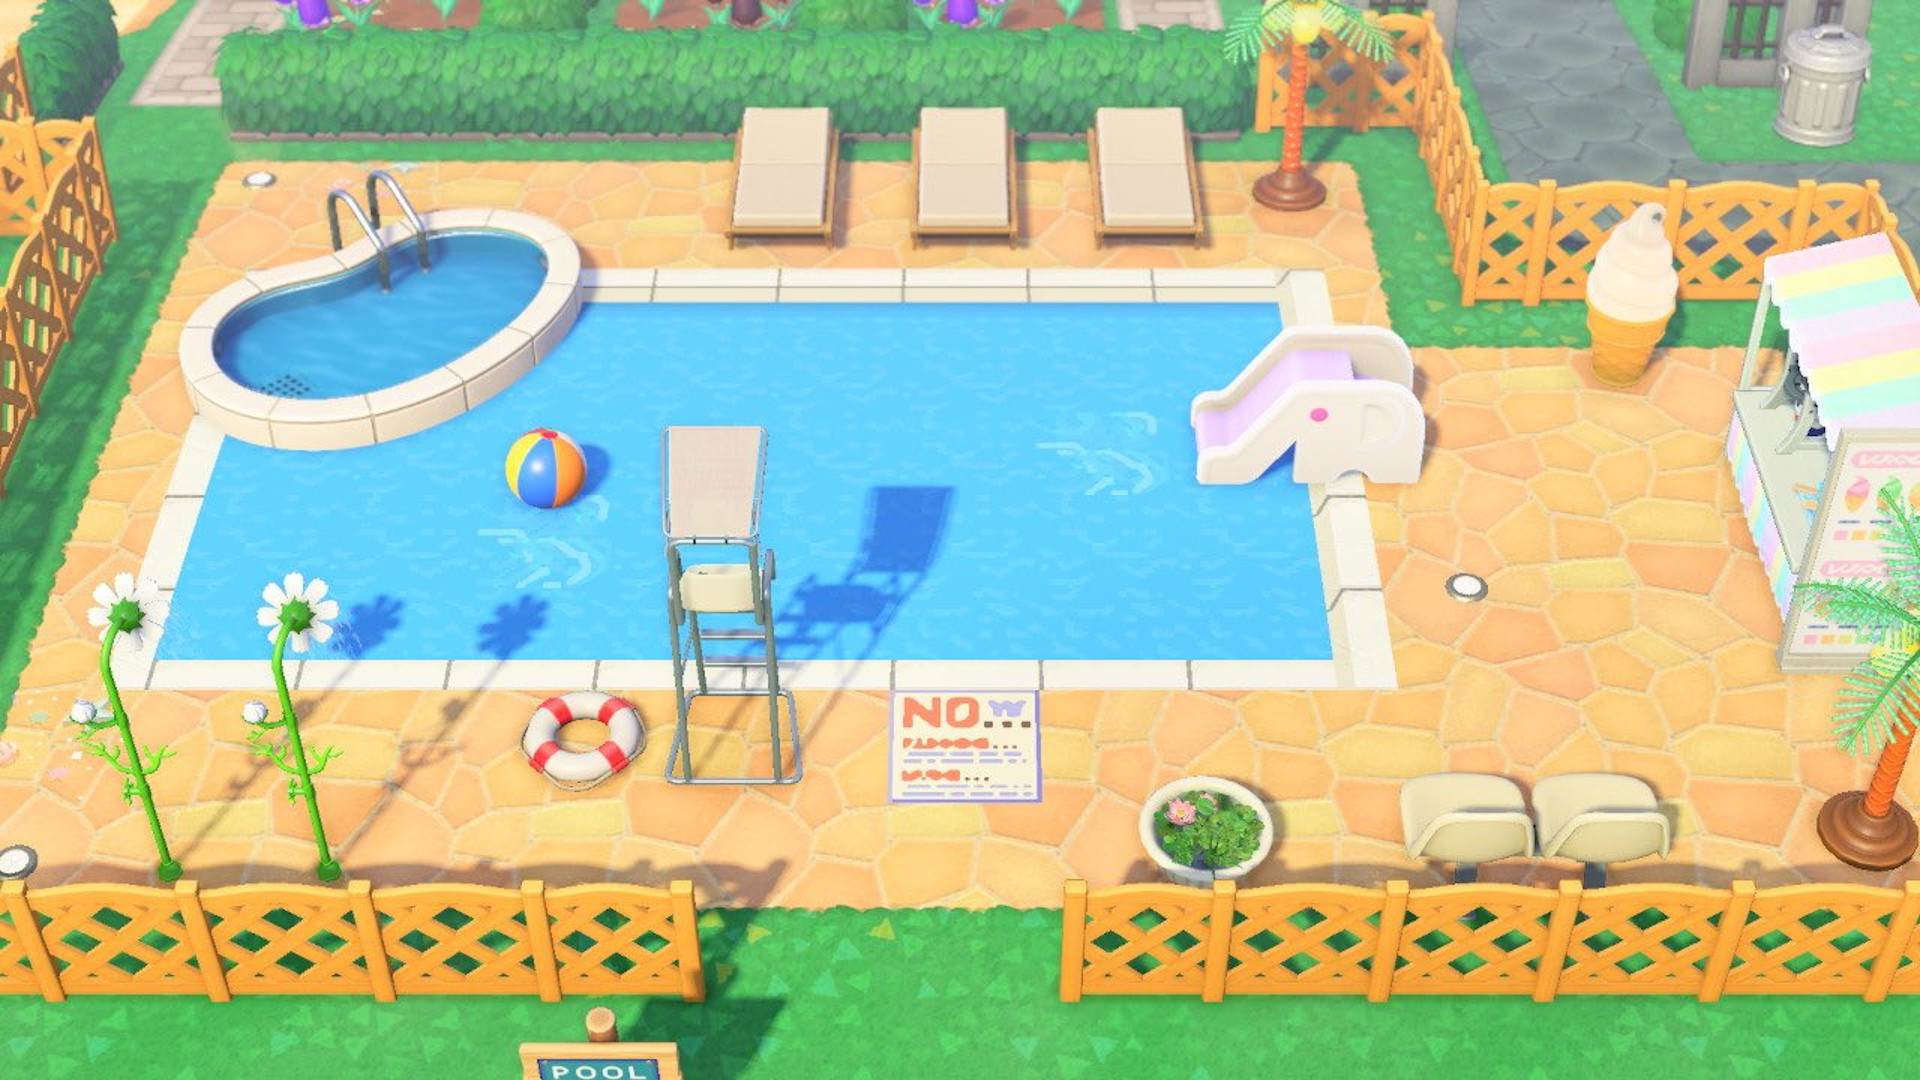 Animal Crossing New Horizons island ideas: A pool party in Animal Crossing, with several chairs, an ice cream stand, showers, and more.